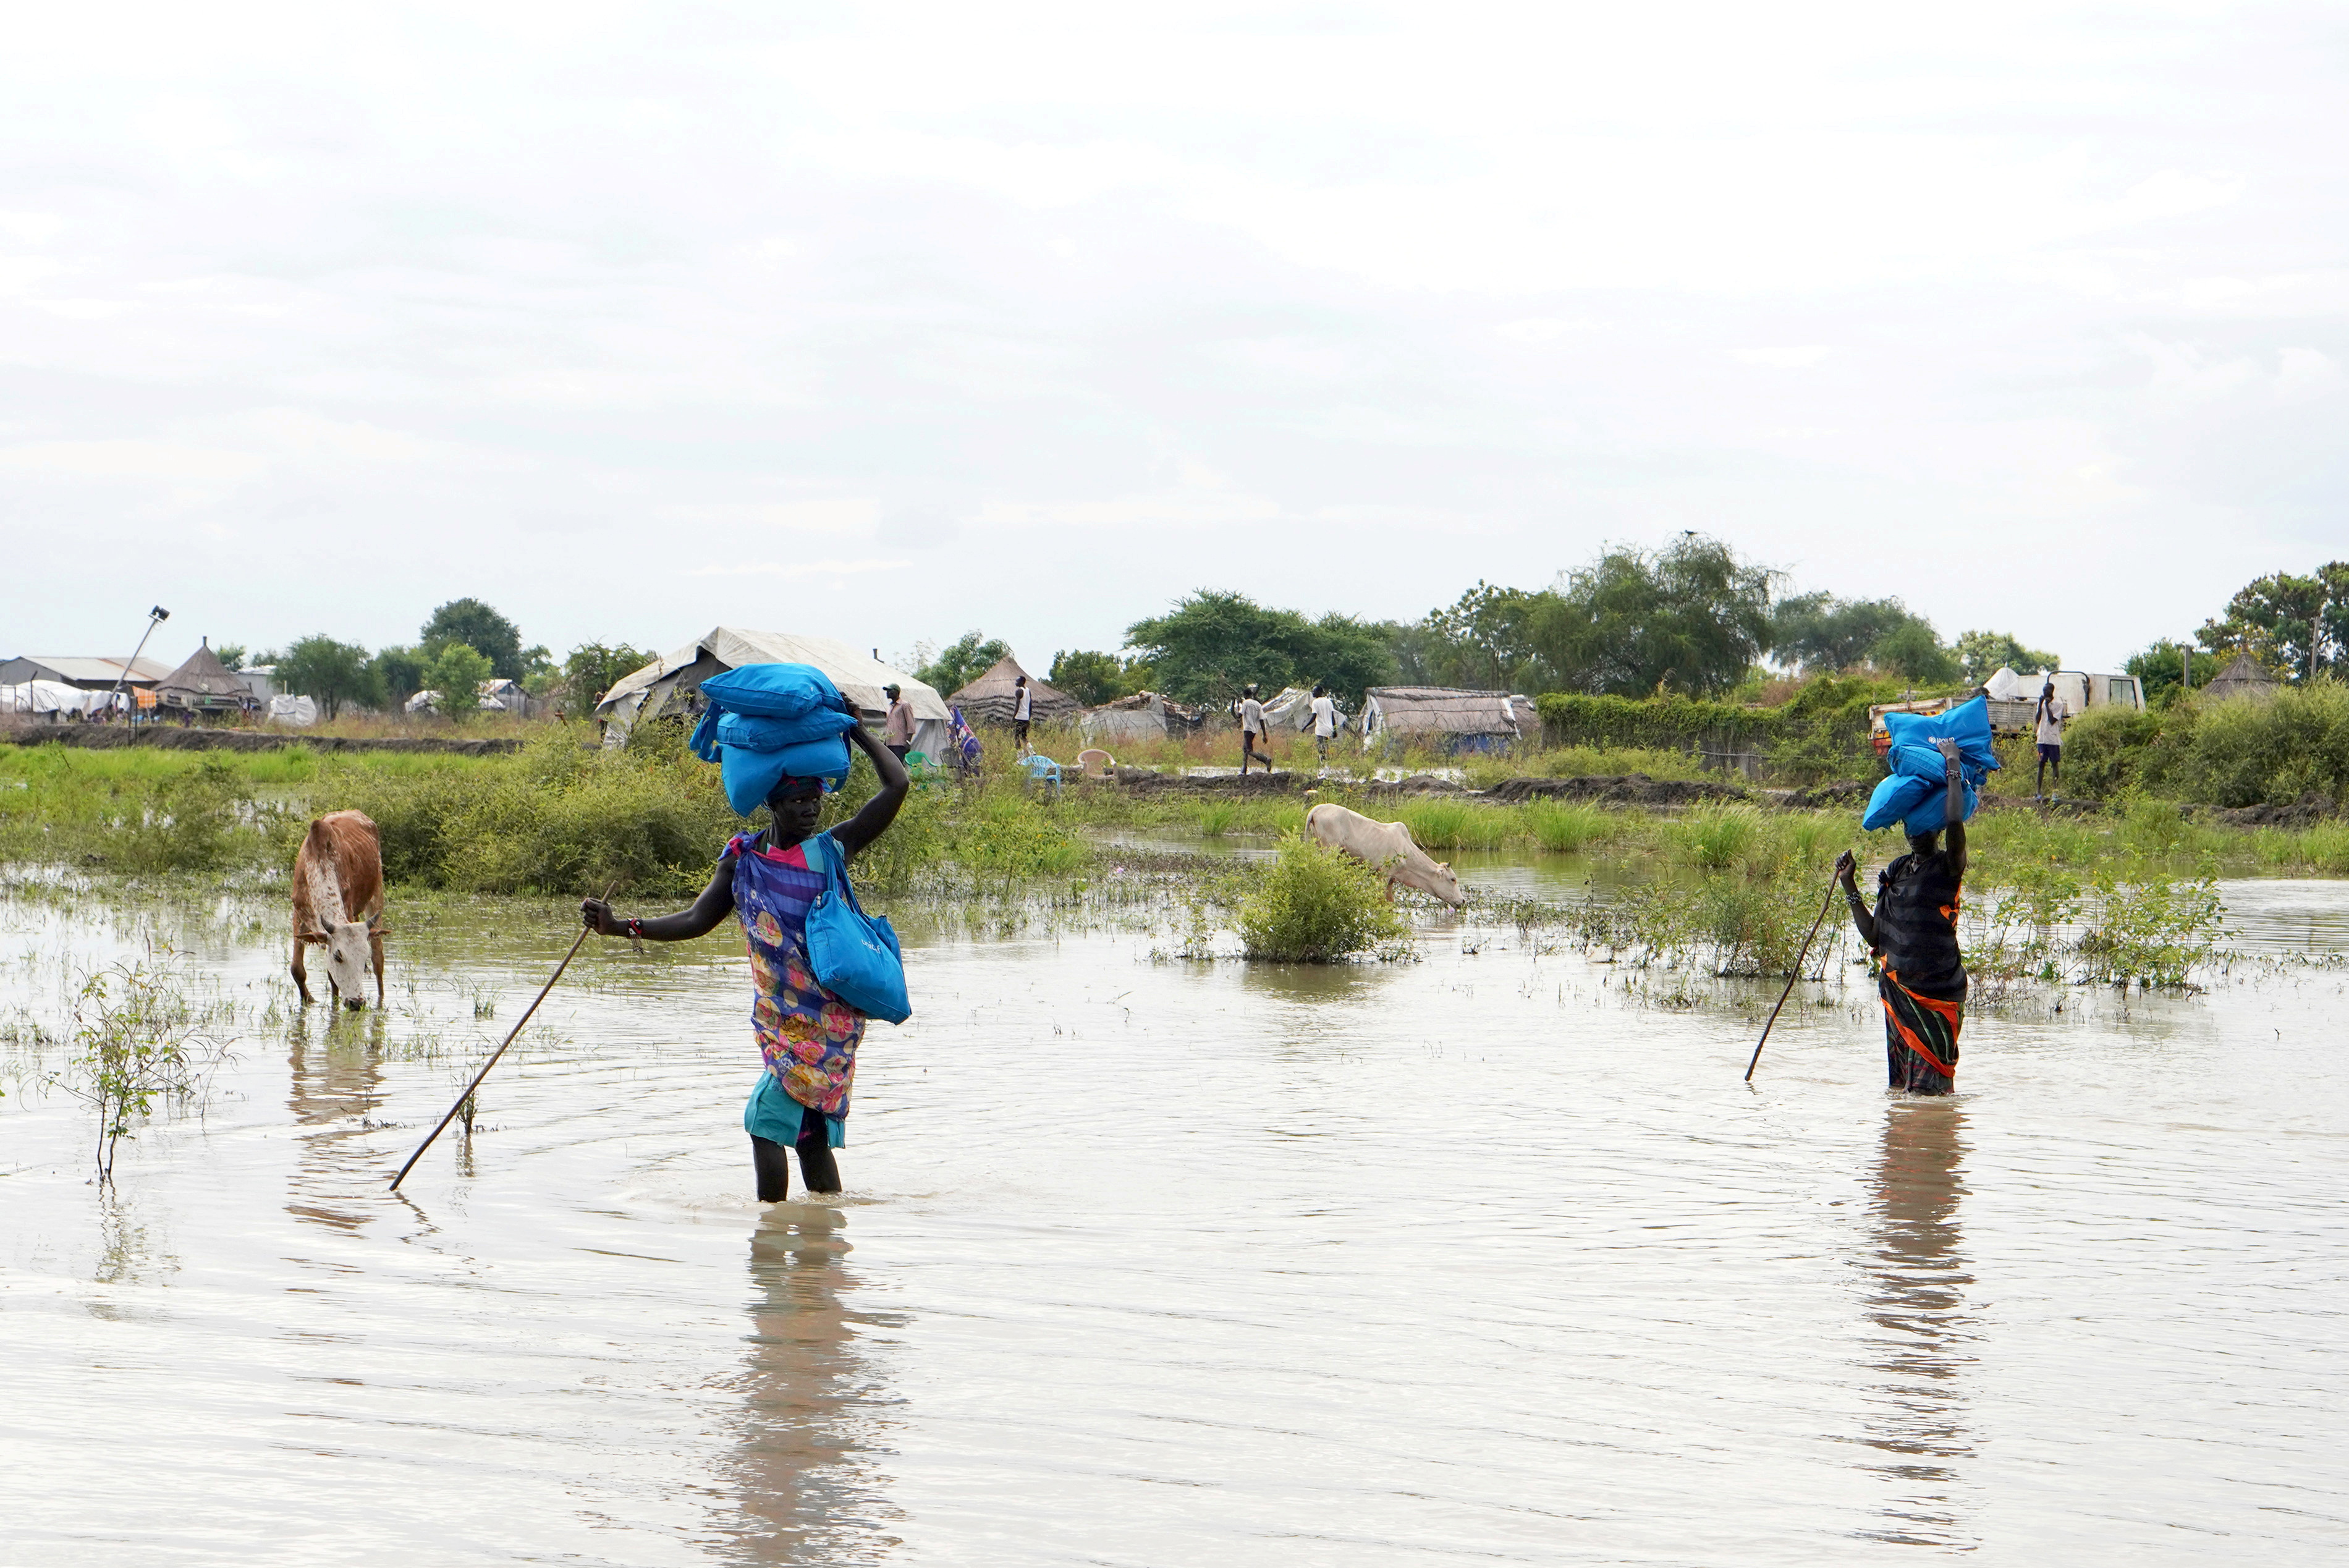 Women carry sacks on their heads as they walk through water, after heavy rains and floods forced hundreds of thousands of people to leave their homes, in the town of Pibor, Boma state, South Sudan, November 6, 2019. REUTERS/Andreea Campeanu